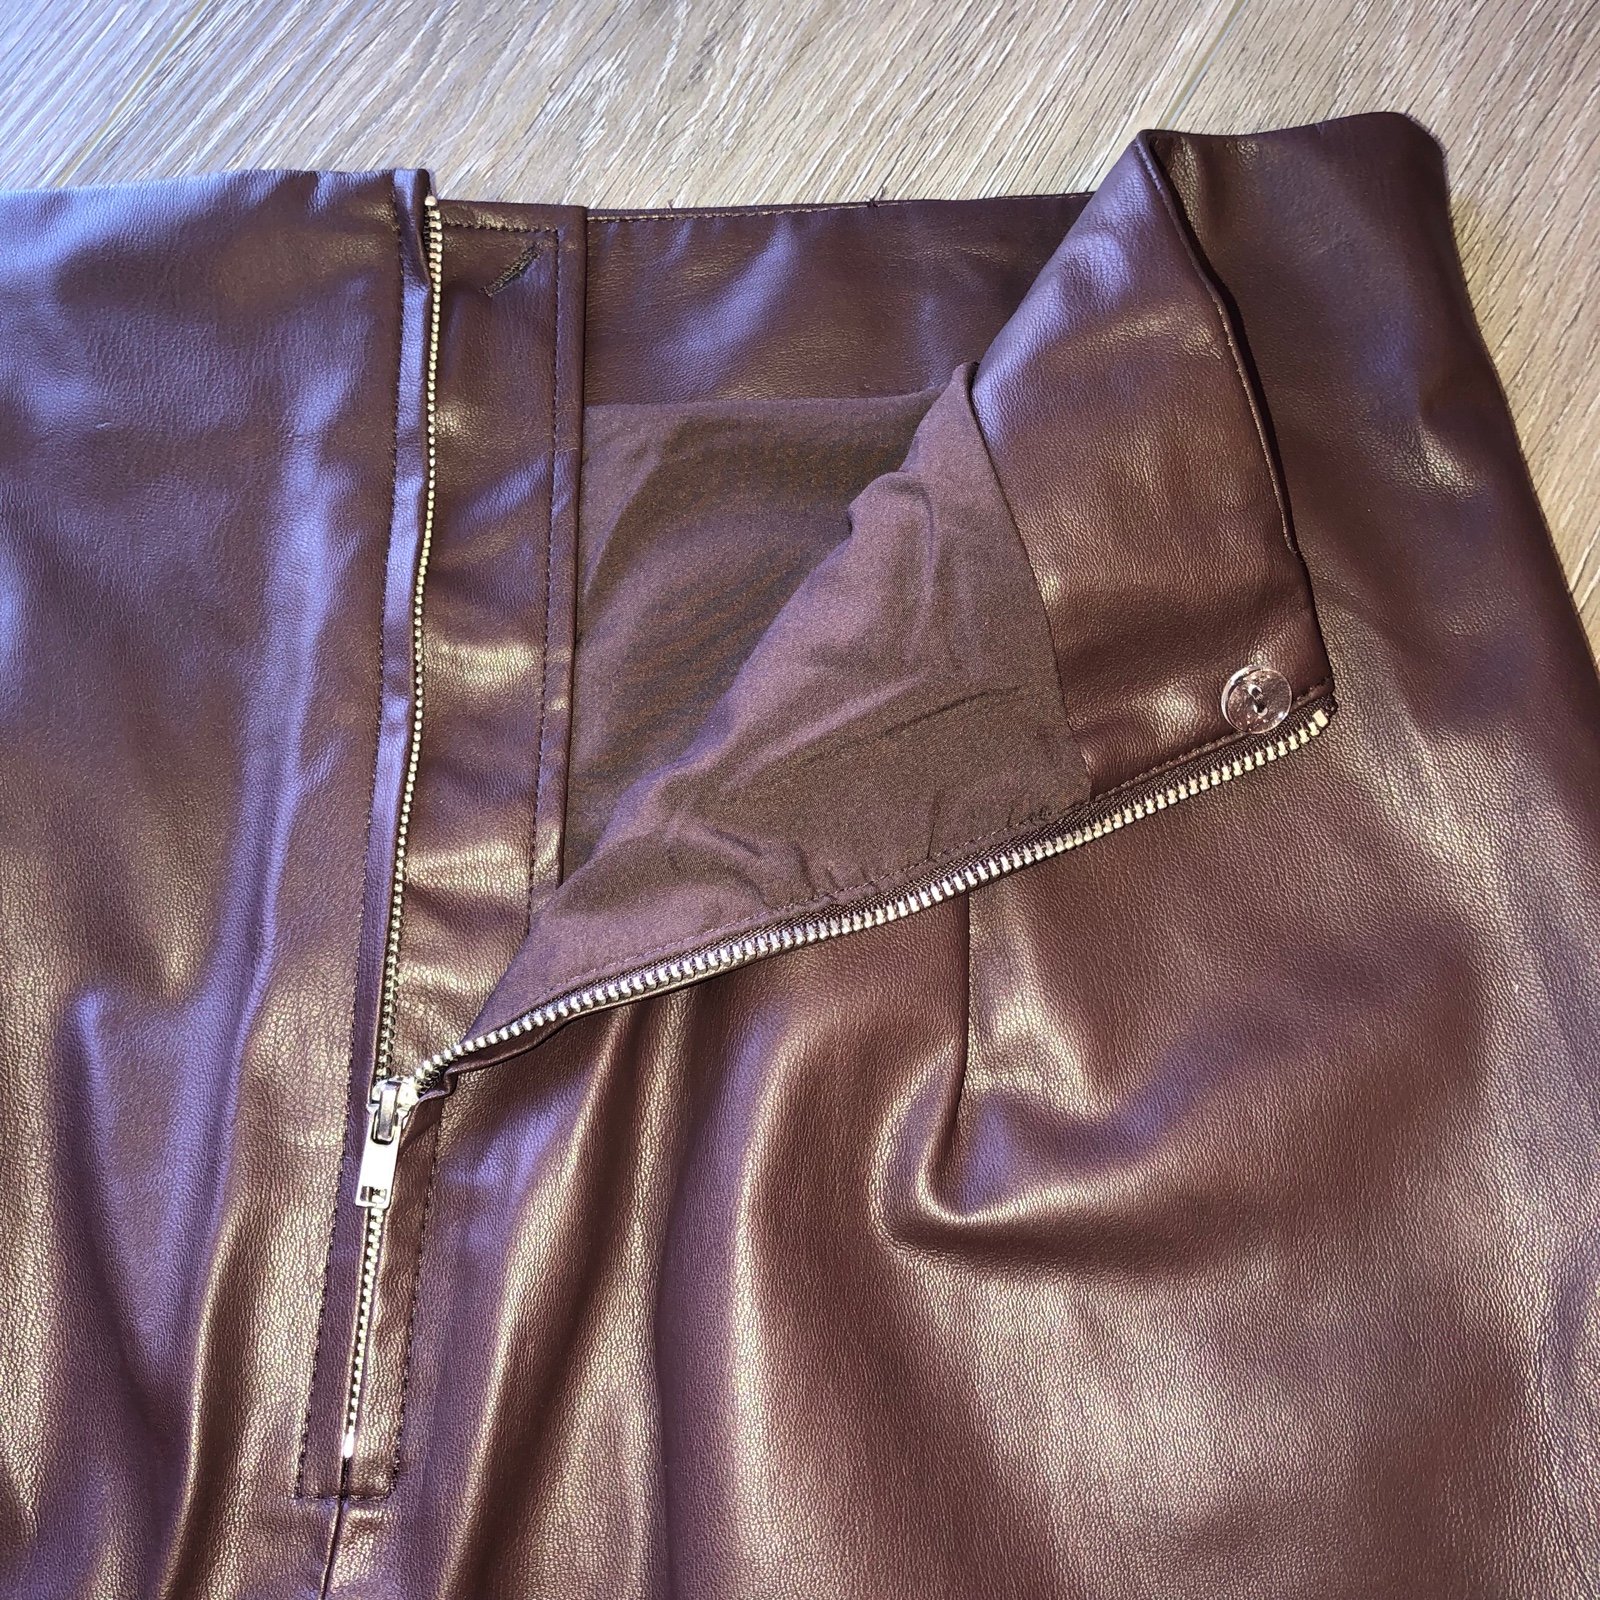 save up to 70% H&M Faux Leather Skirt Burgundy Size 12 OQegClTO4 Buying Cheap